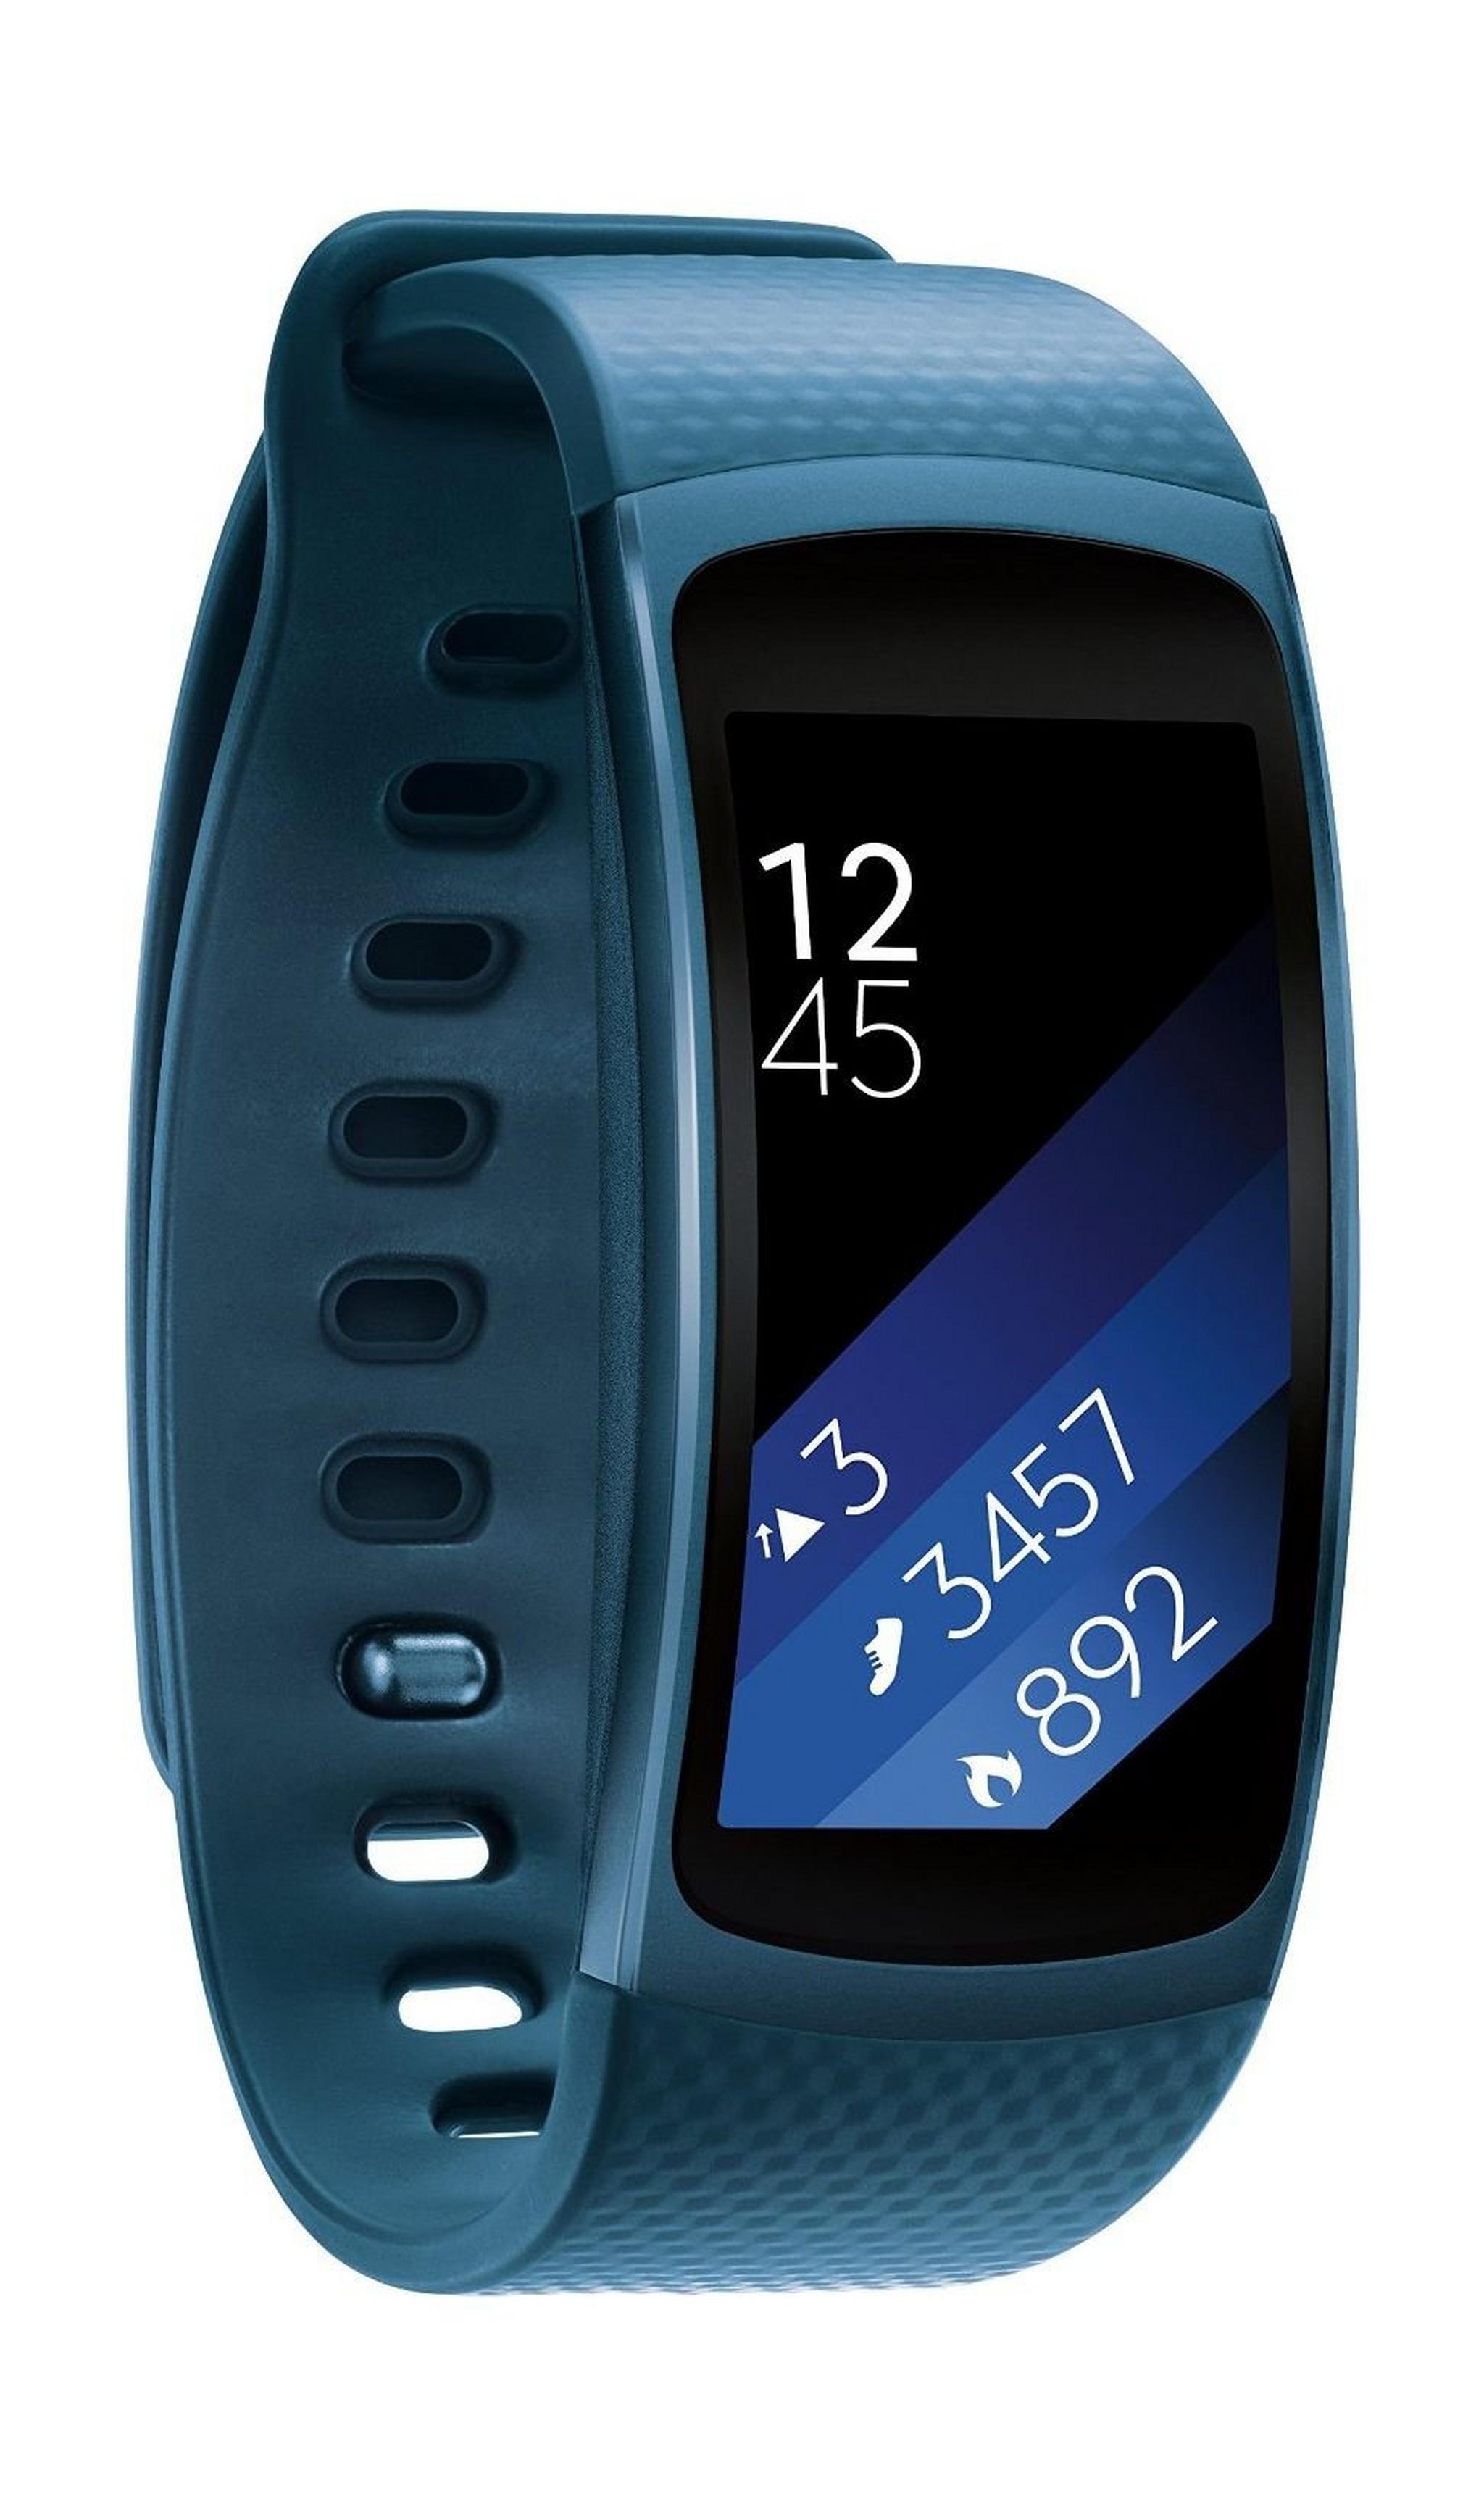 Samsung Gear Fit 2 Fitness Tracker (Large) – Blue